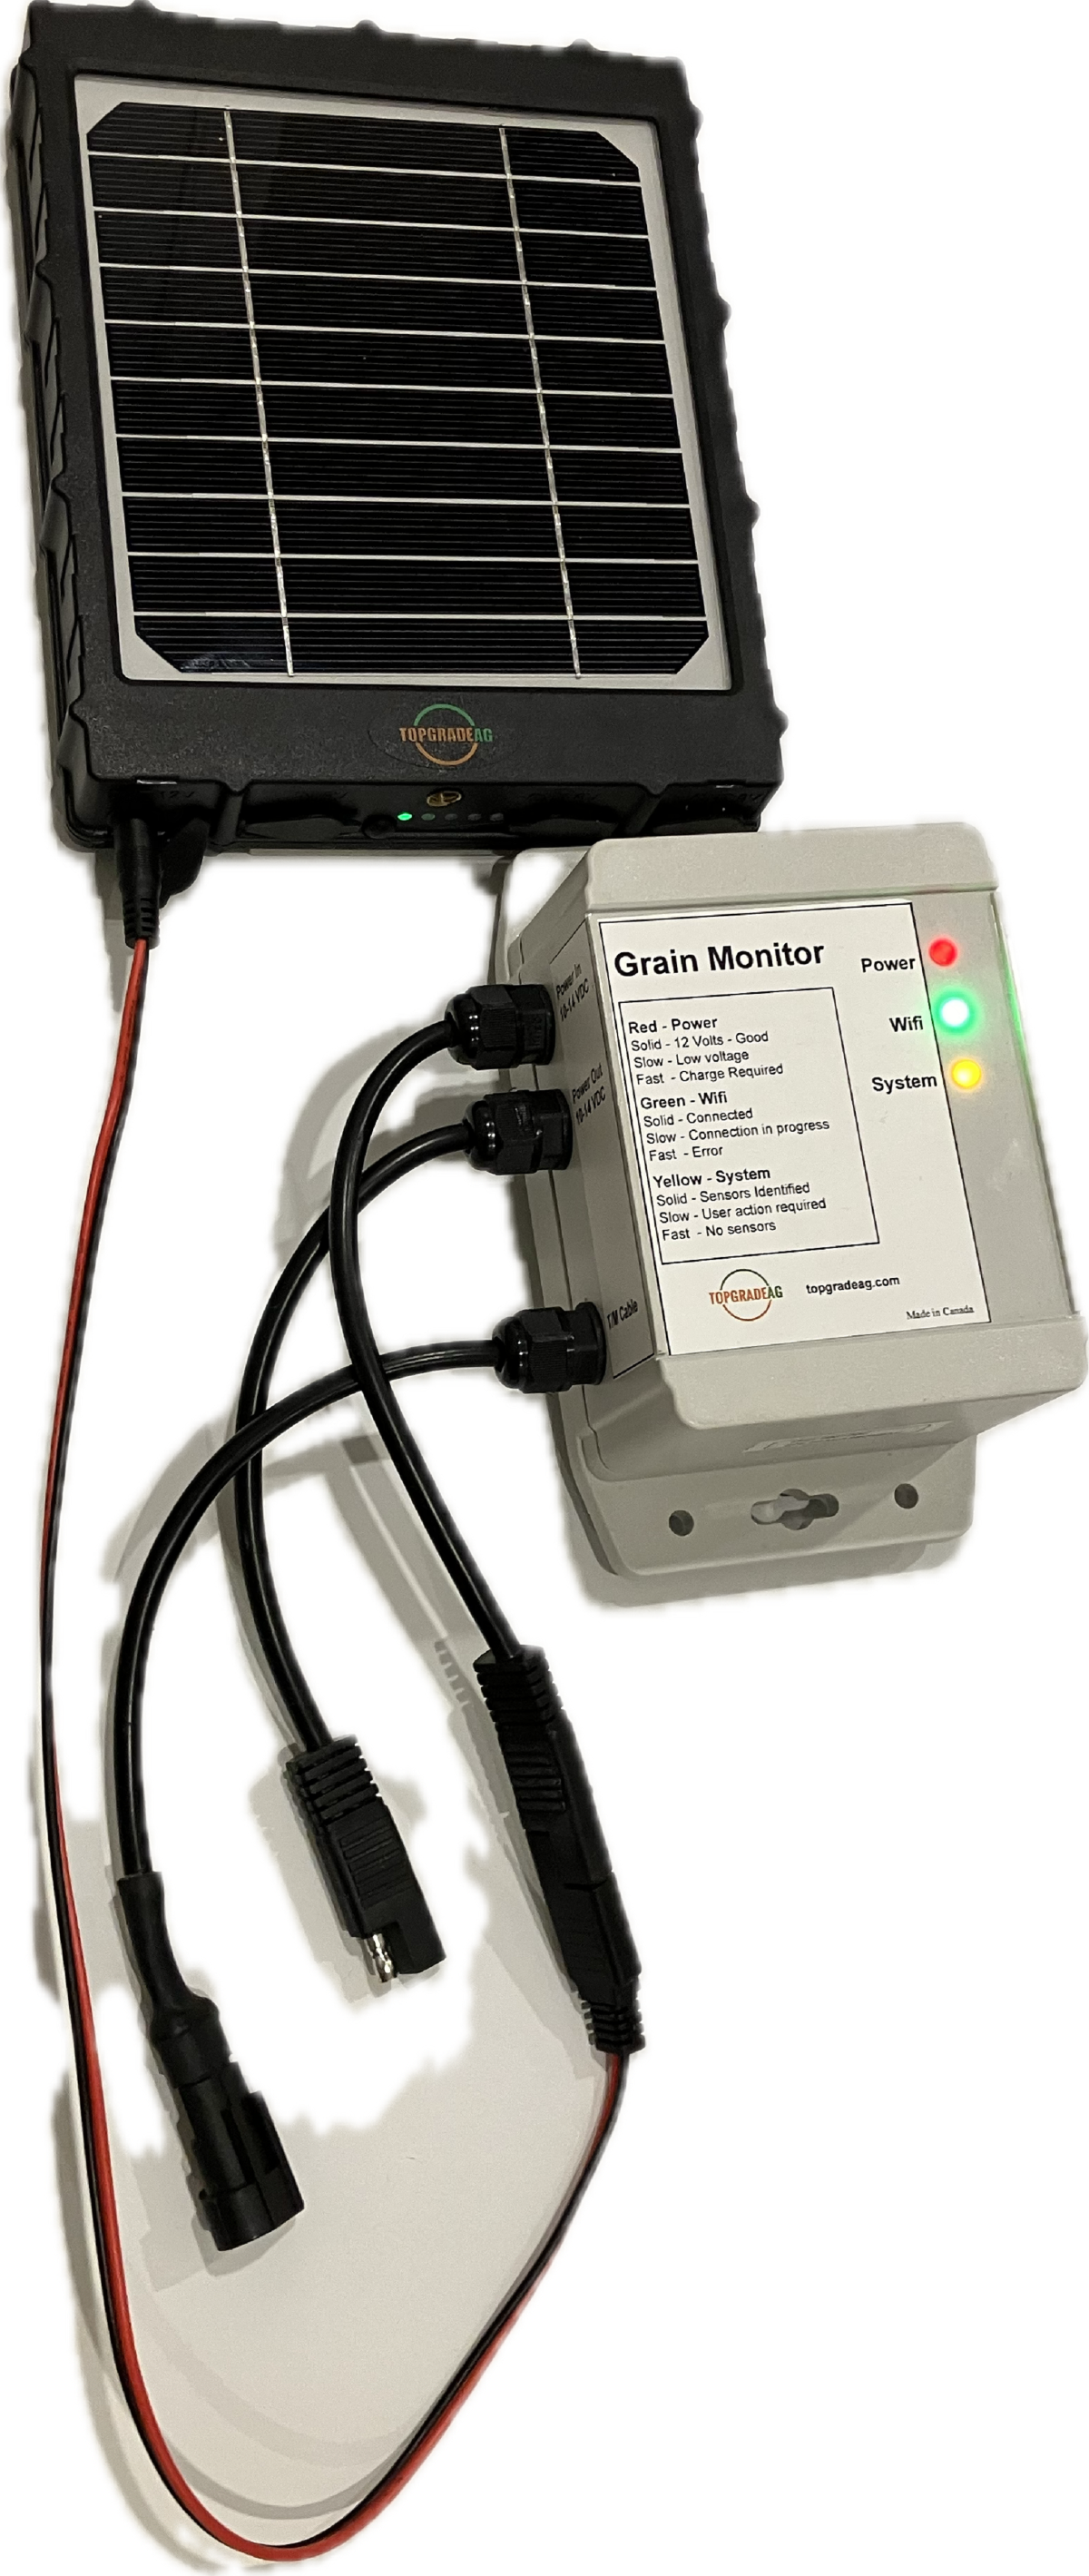 Grain Monitoring system - 5 cables Plus